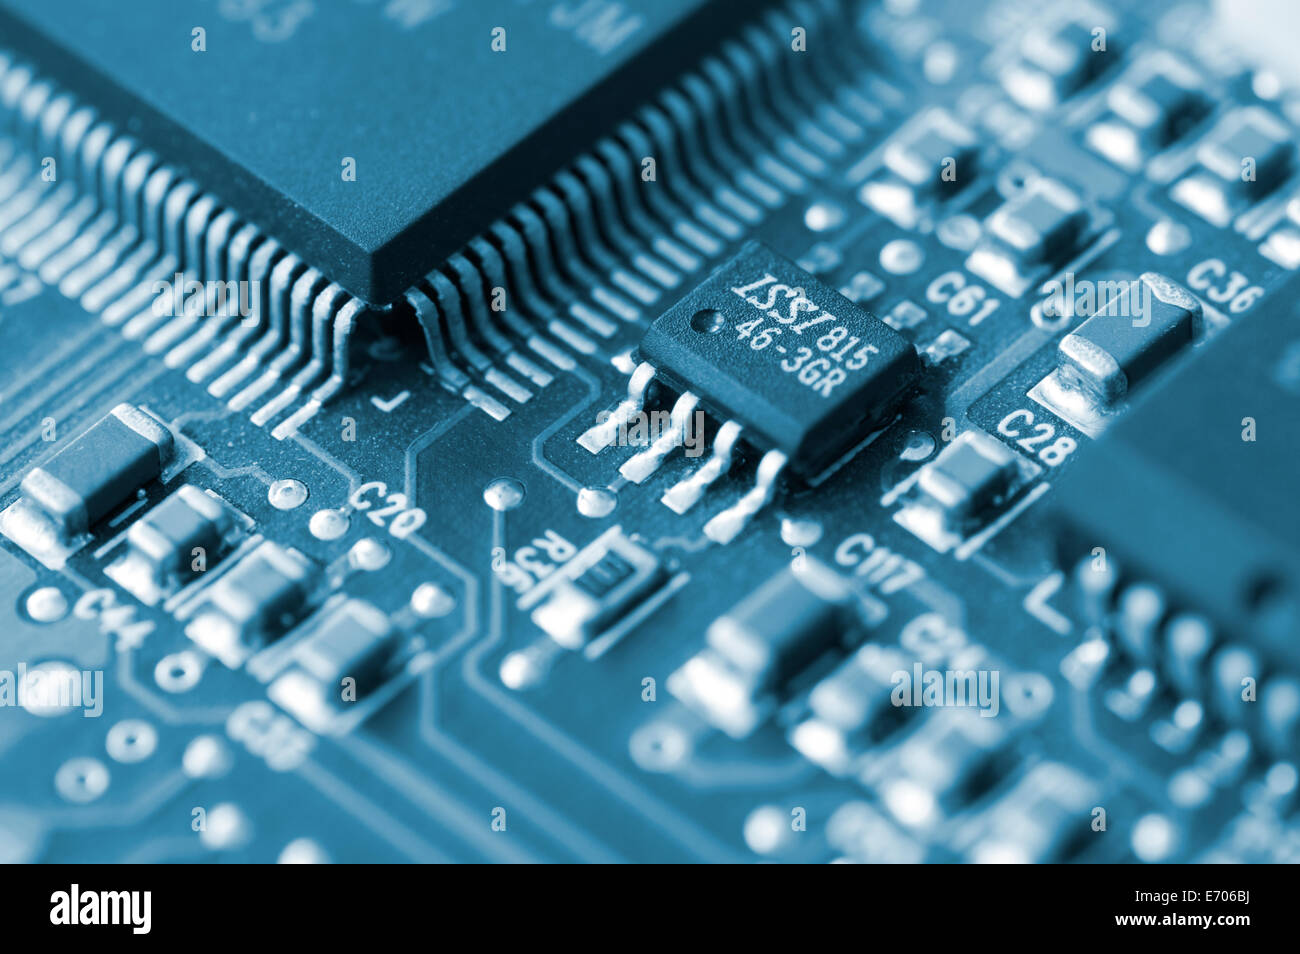 Closeup of a printed circuit board with components such as integrated circuits Stock Photo